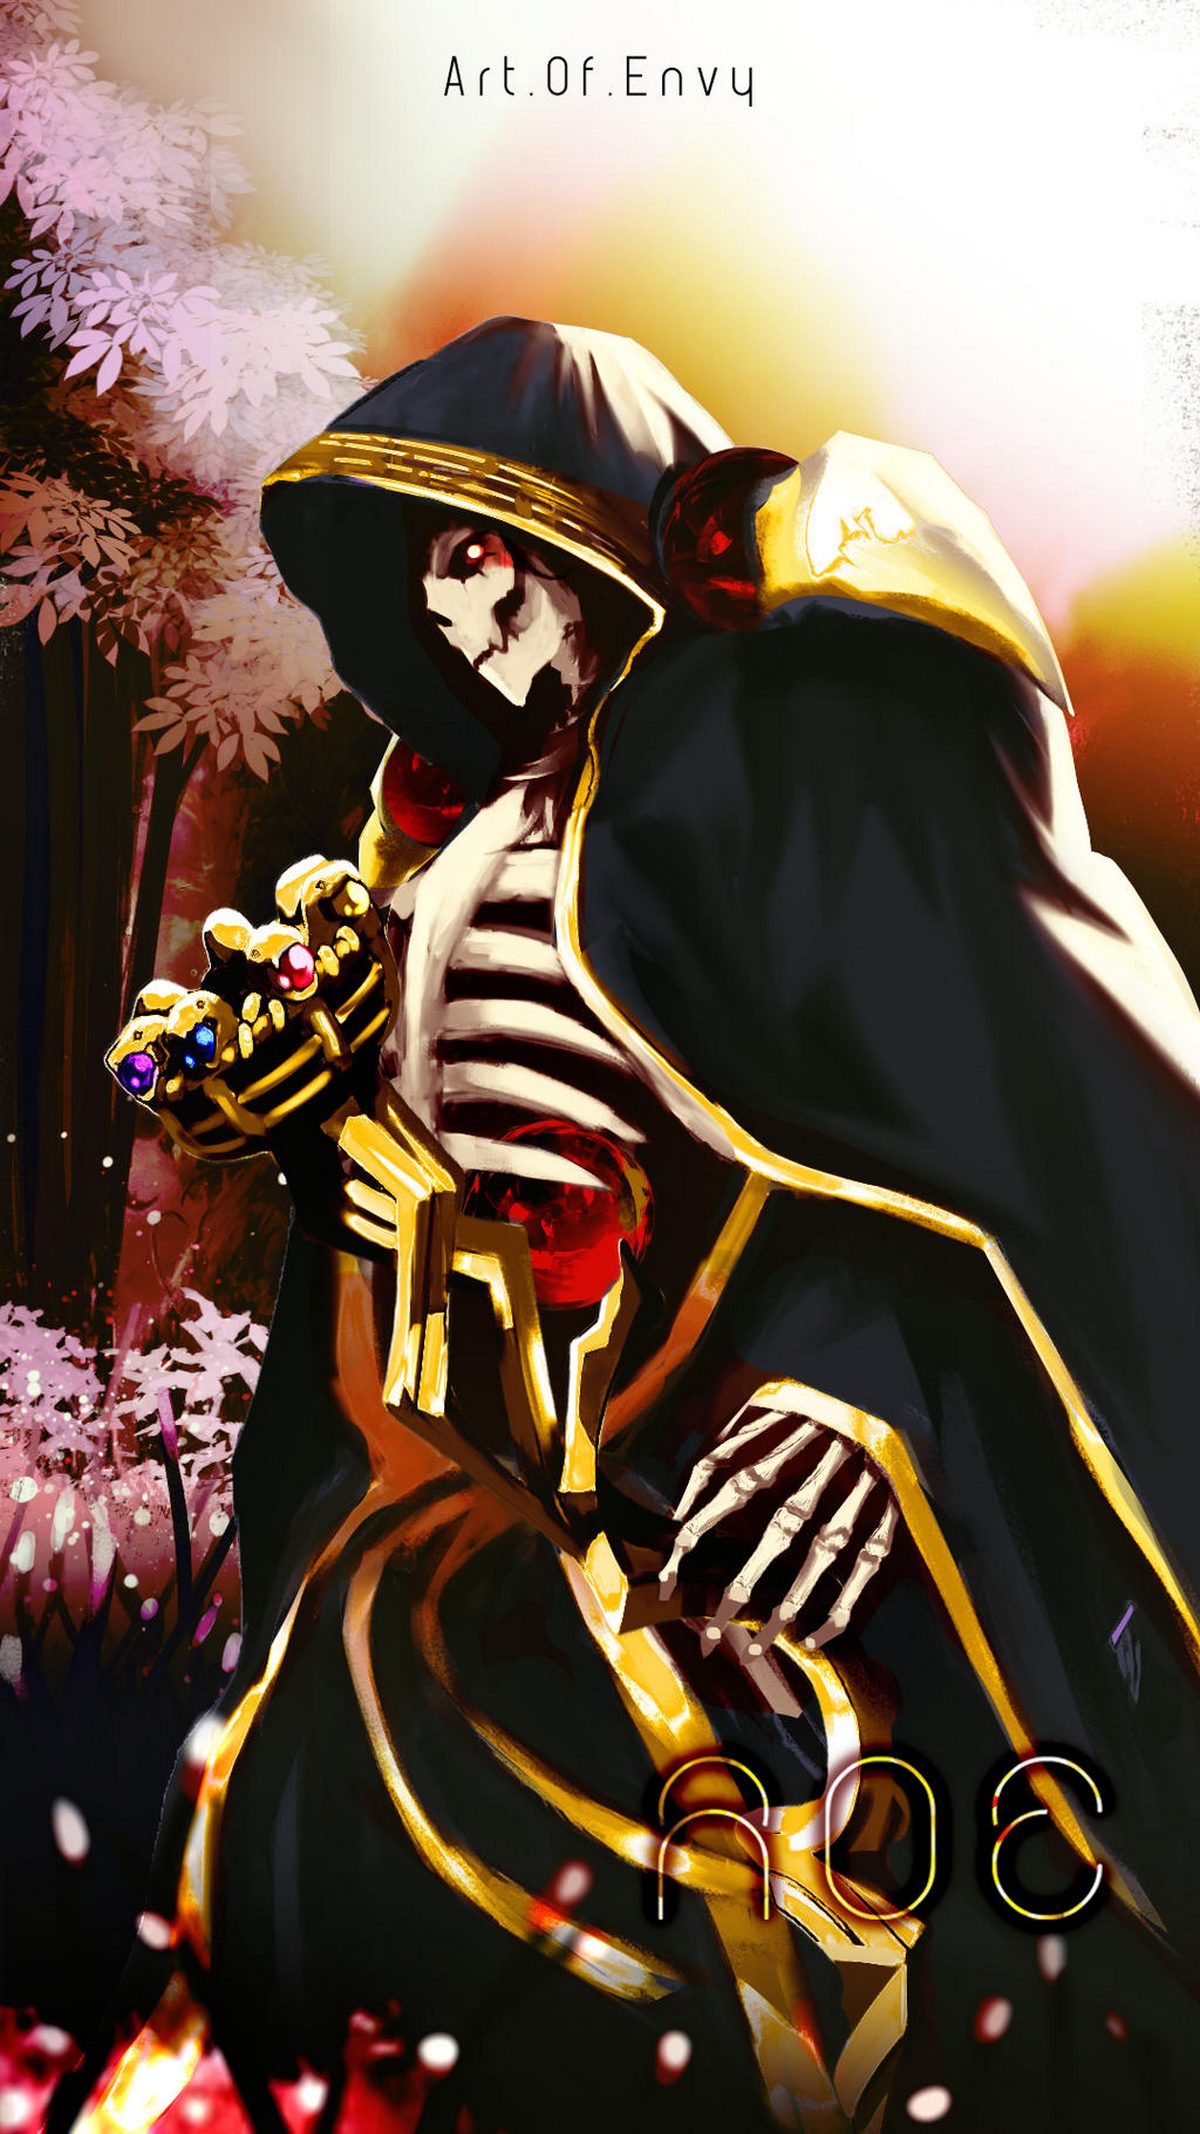 Ainz Ooal Gown – Overlord